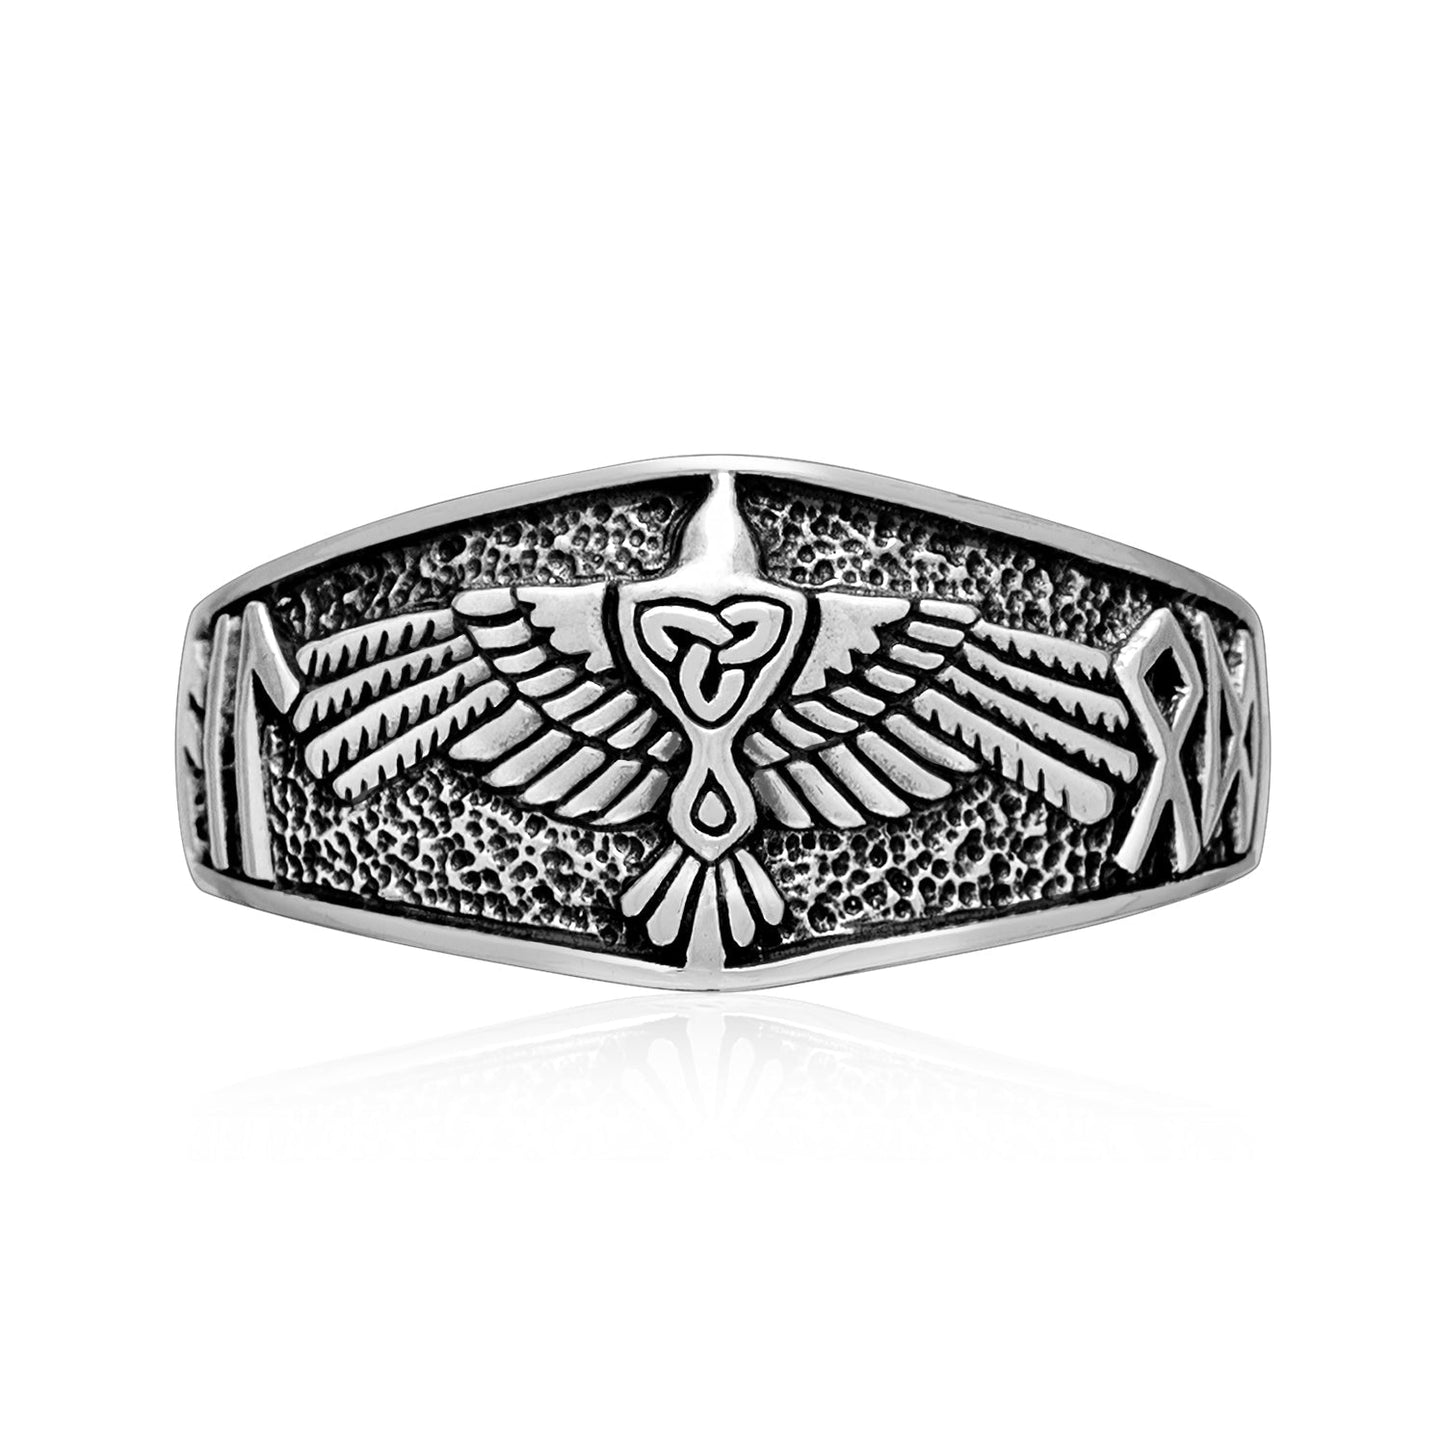 925 Sterling Silver Viking Raven Ring with Heil Odin Runic Script - SilverMania925